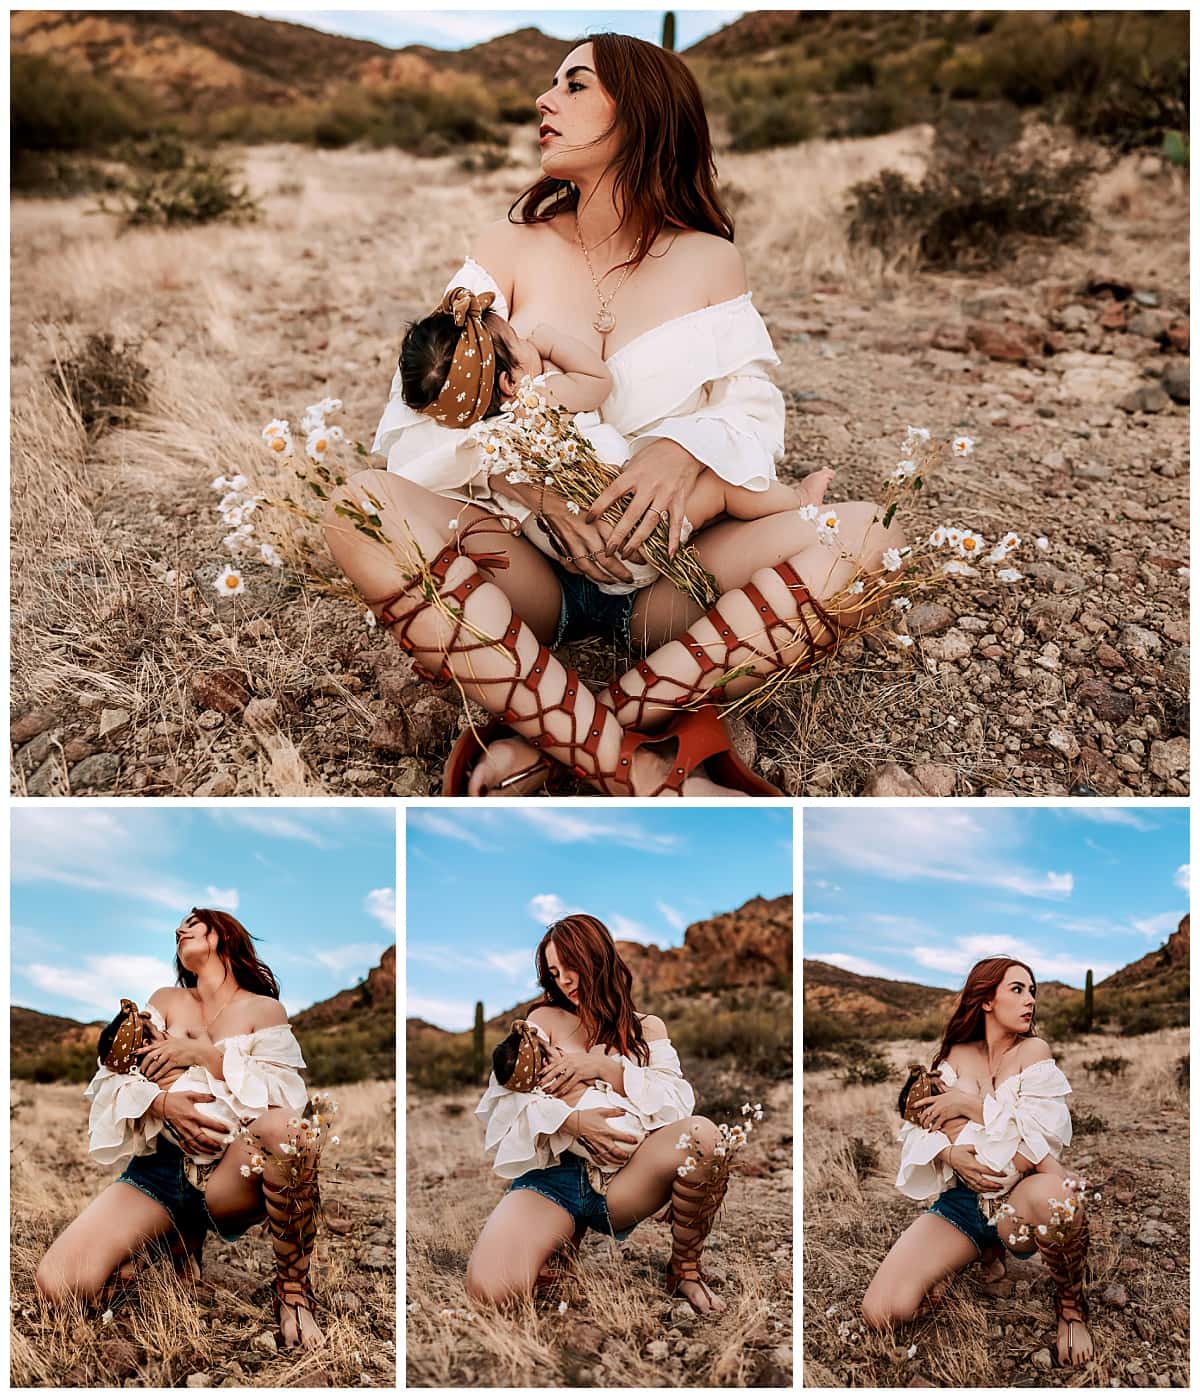 Mom nurses baby girl on desert floor for their family lifestyle photoshoot by MacKenzie Pudenz Photography.